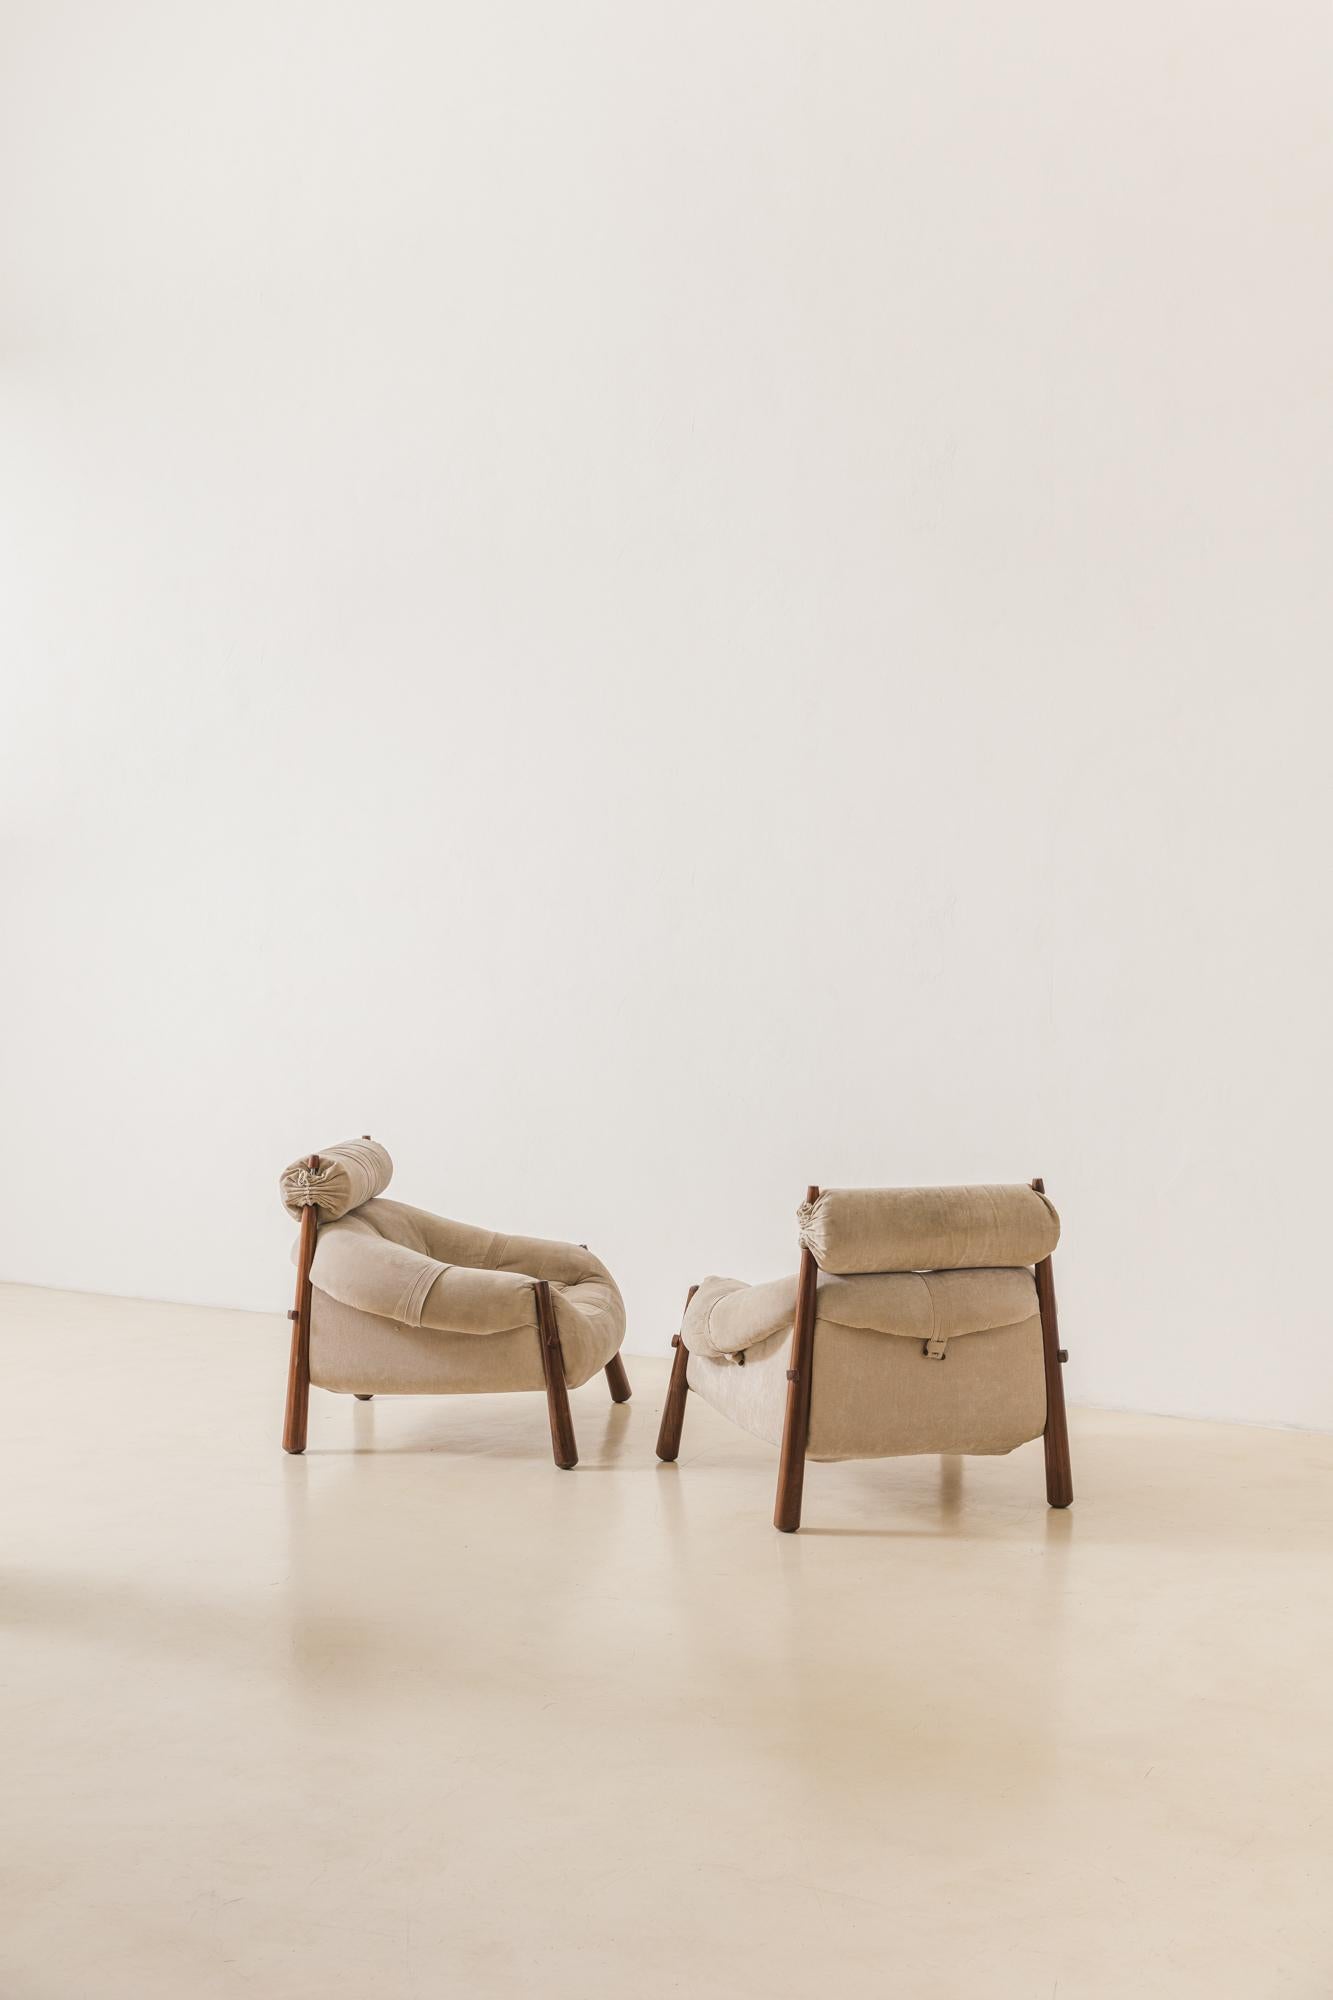 Leather MP-81 Lounge Chair, by Percival Lafer, Late Mid-Century Modern Brazilian, 1970